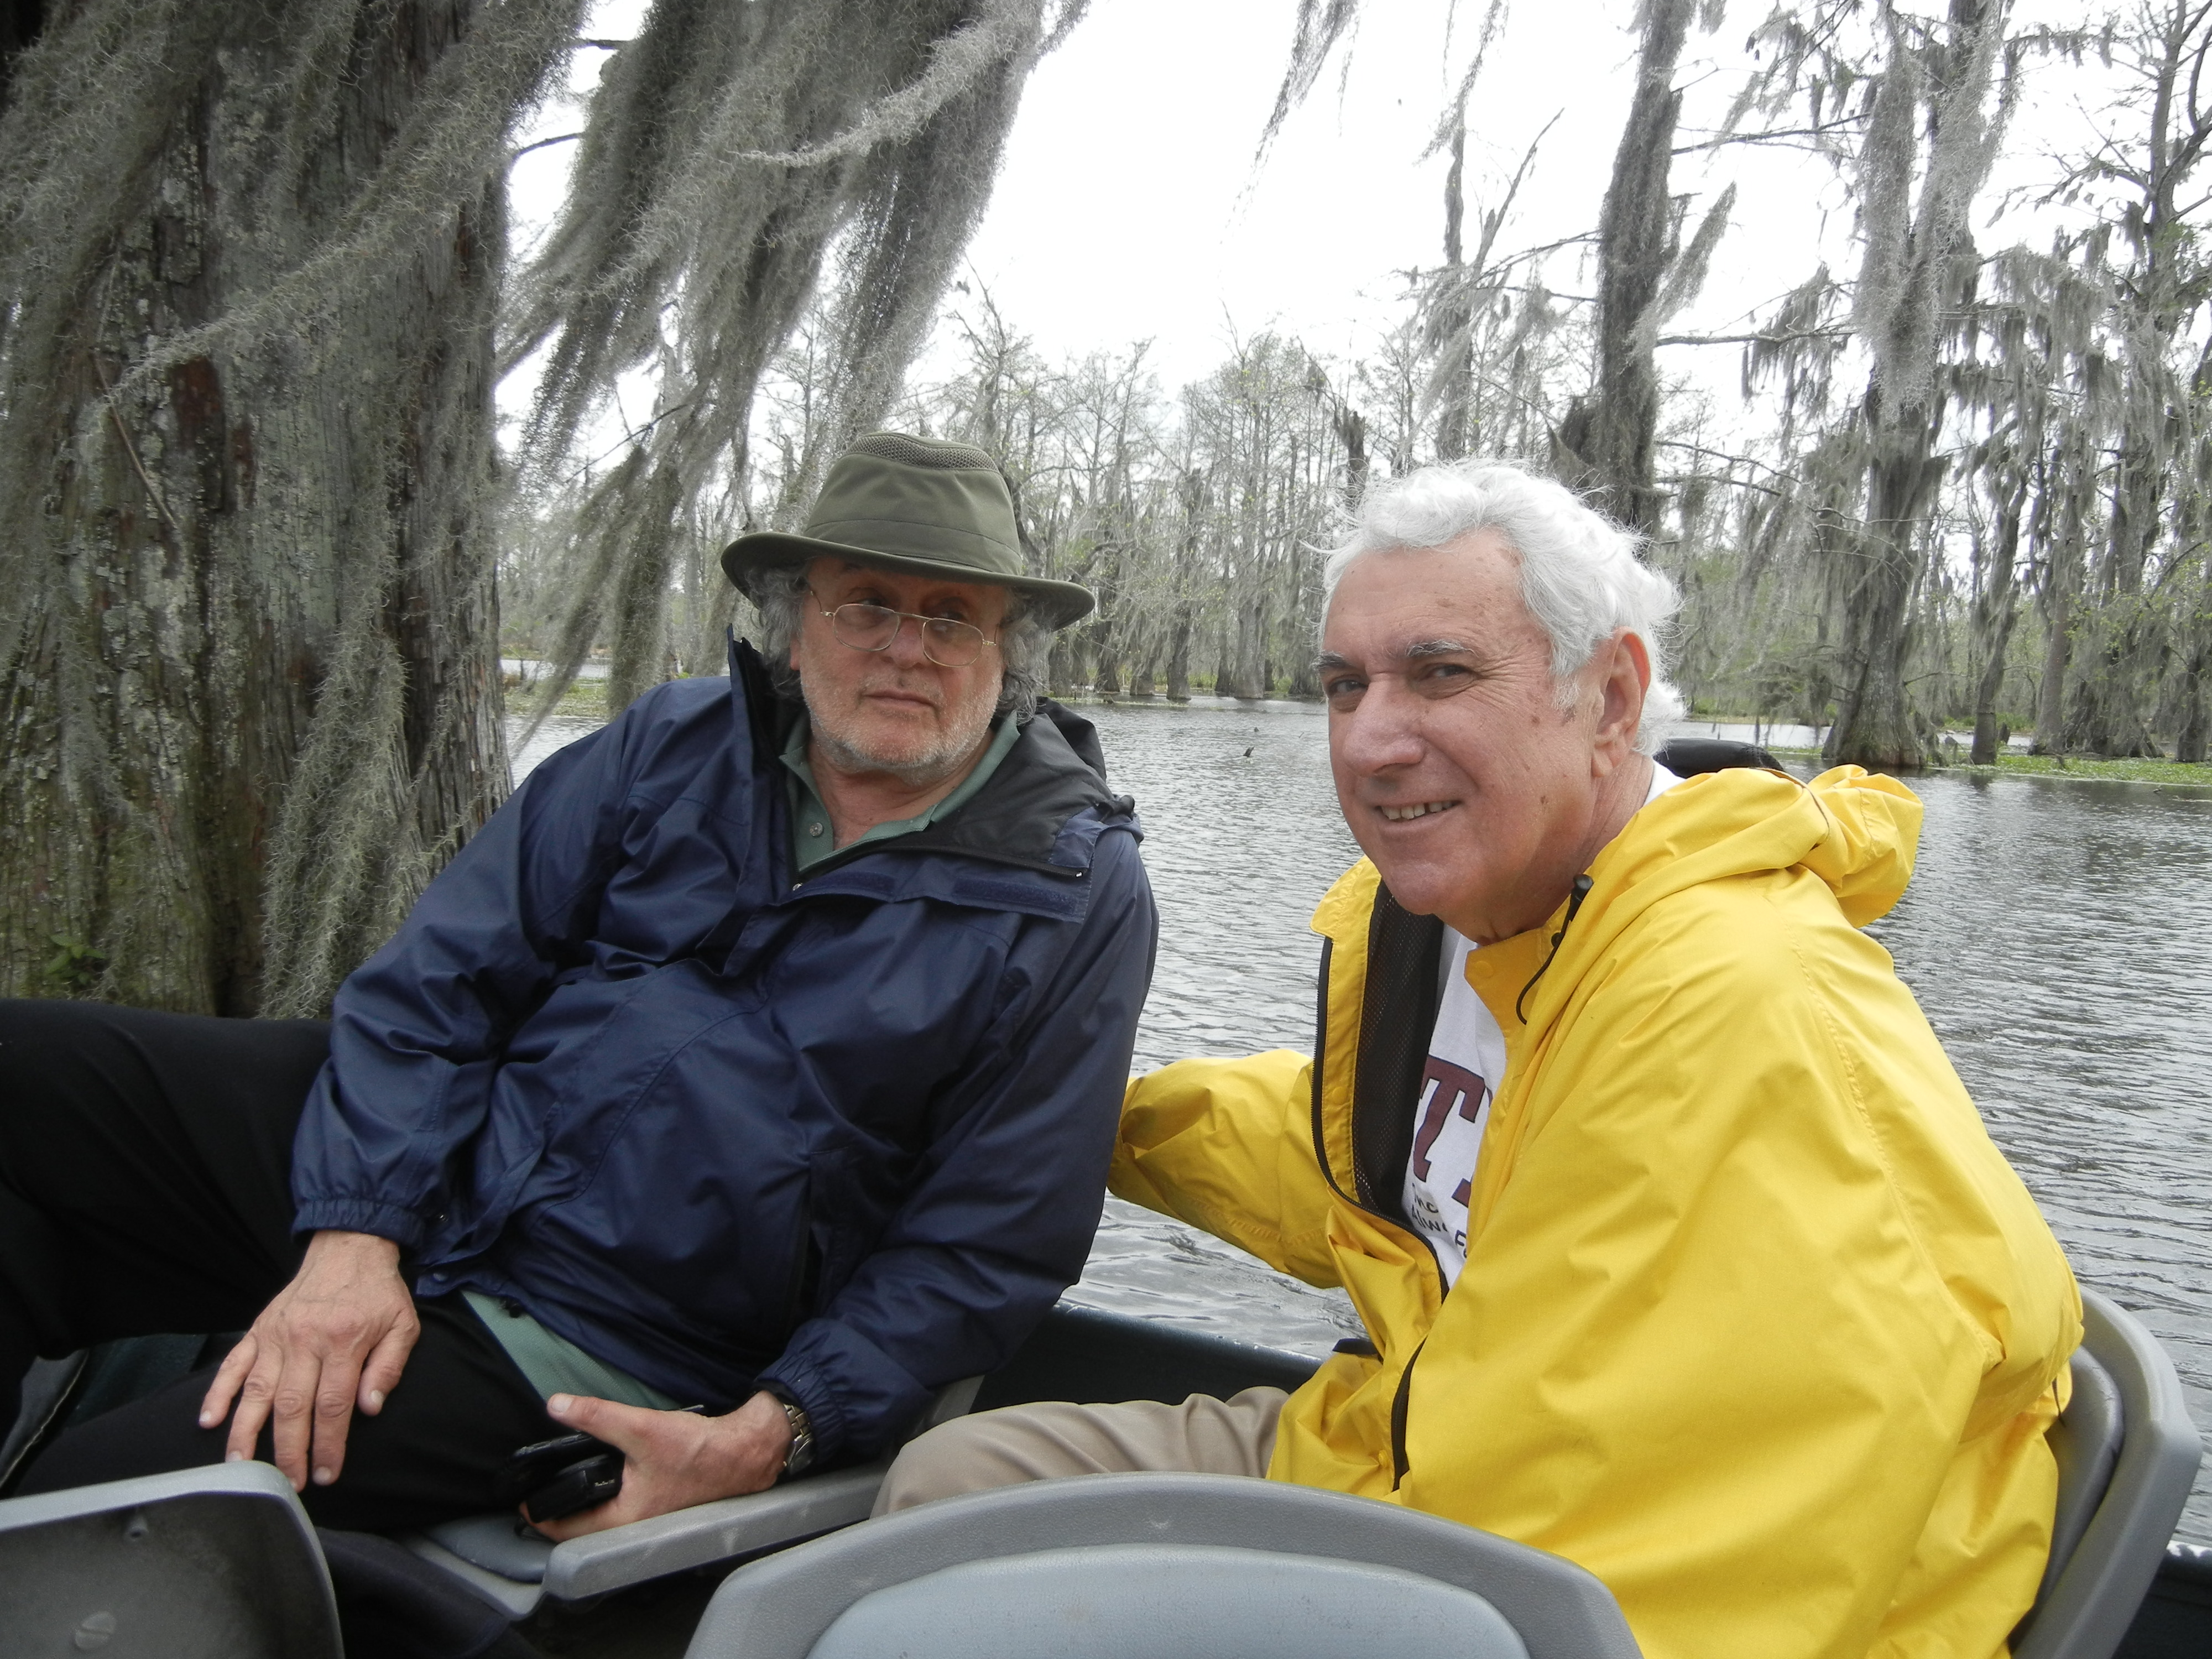 Jerry and Richard in a boat on Lake Martin in southwestern Louisiana